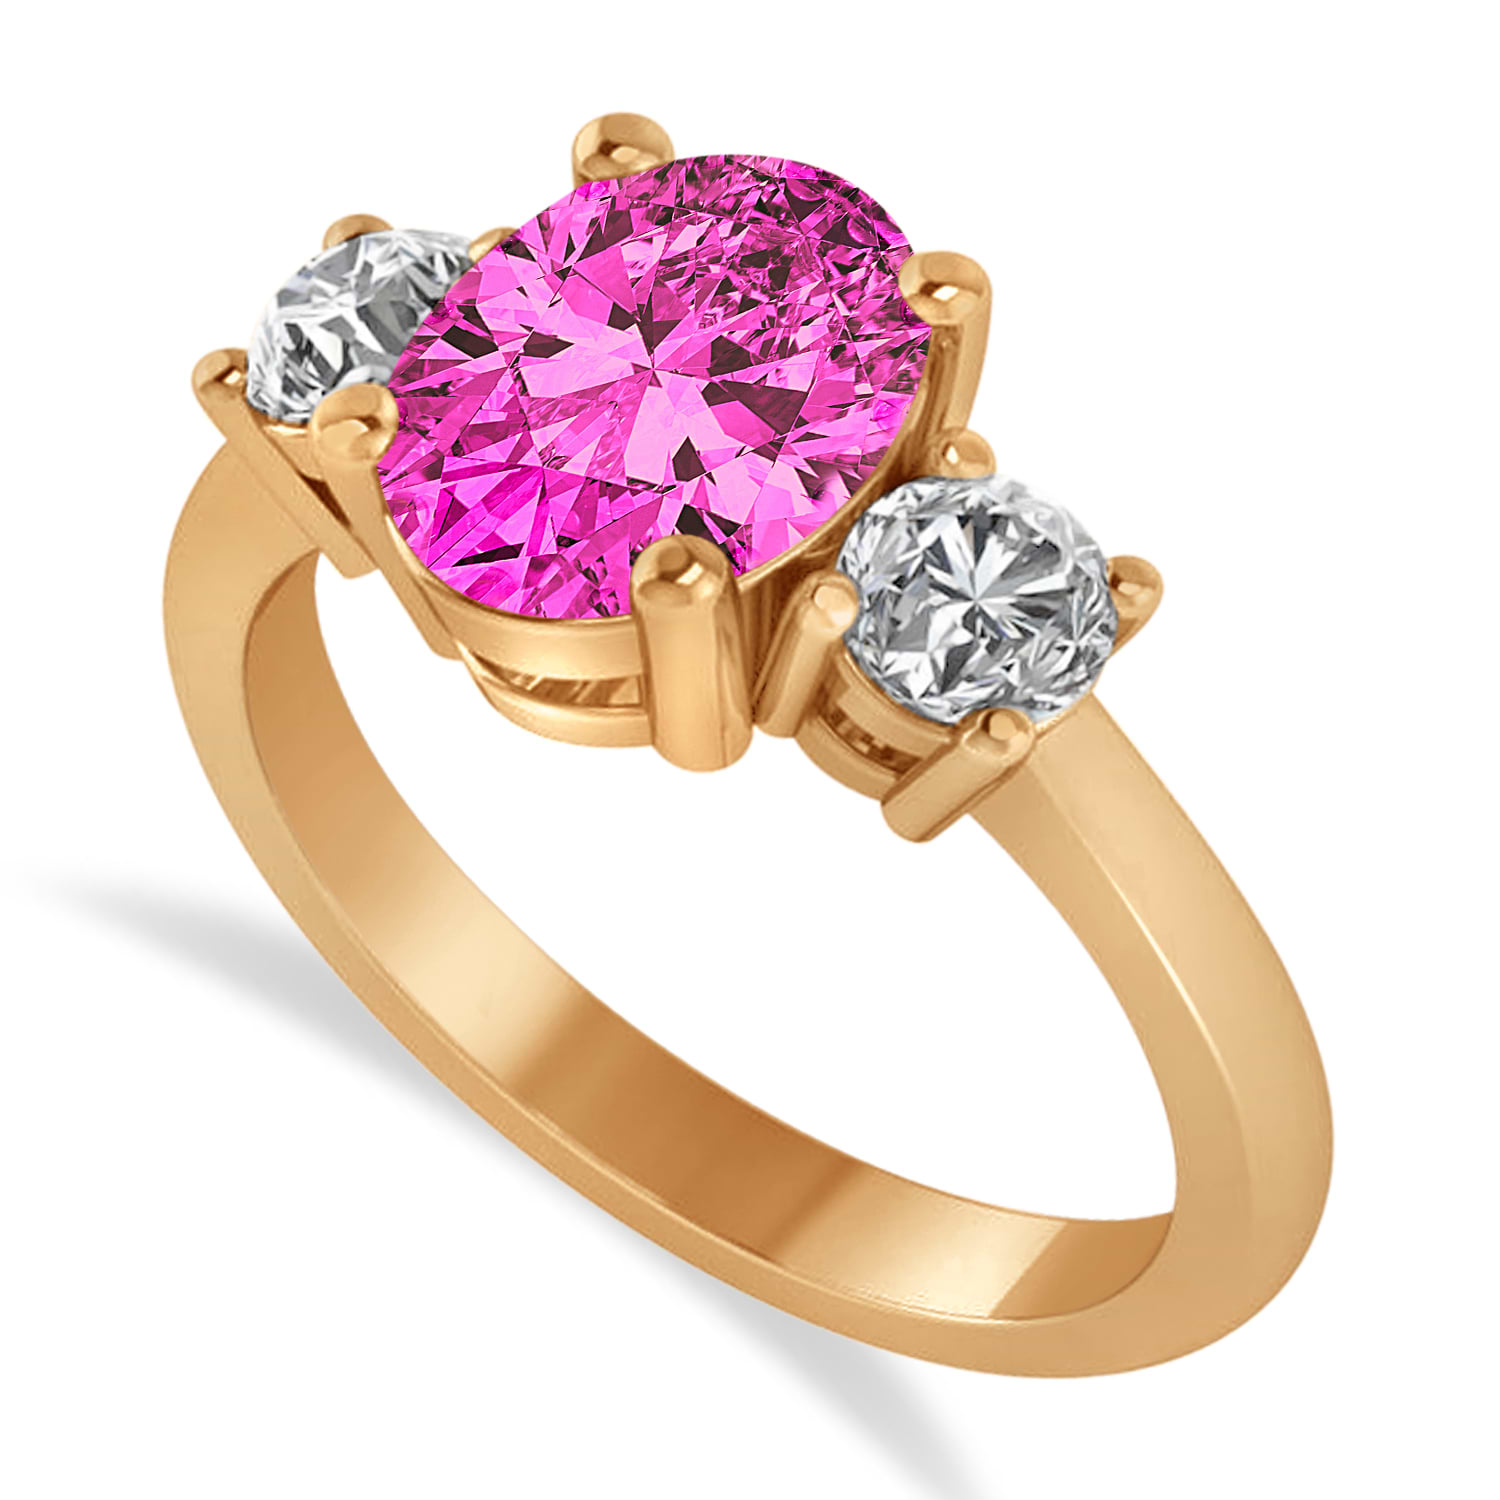 Buy Pink Topaz and Diamond Ring-pink Topaz Ring-gold Ring With a Pink Topaz  and Diamonds Online in India - Etsy